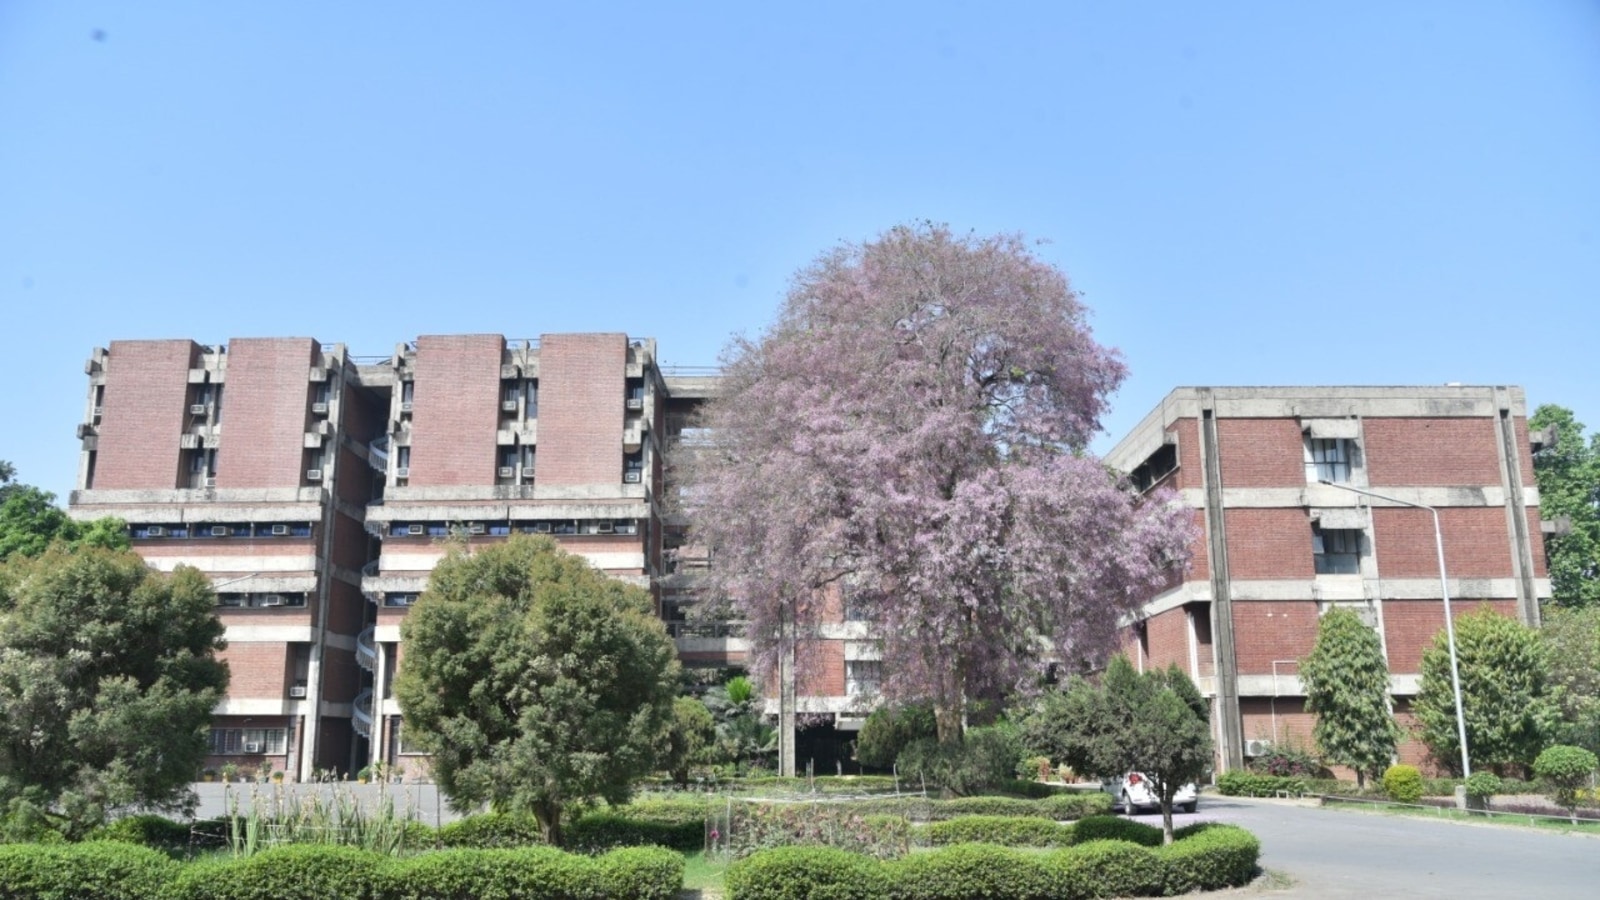 IIT Kanpur launches eMasters with four new programs for IT professiona